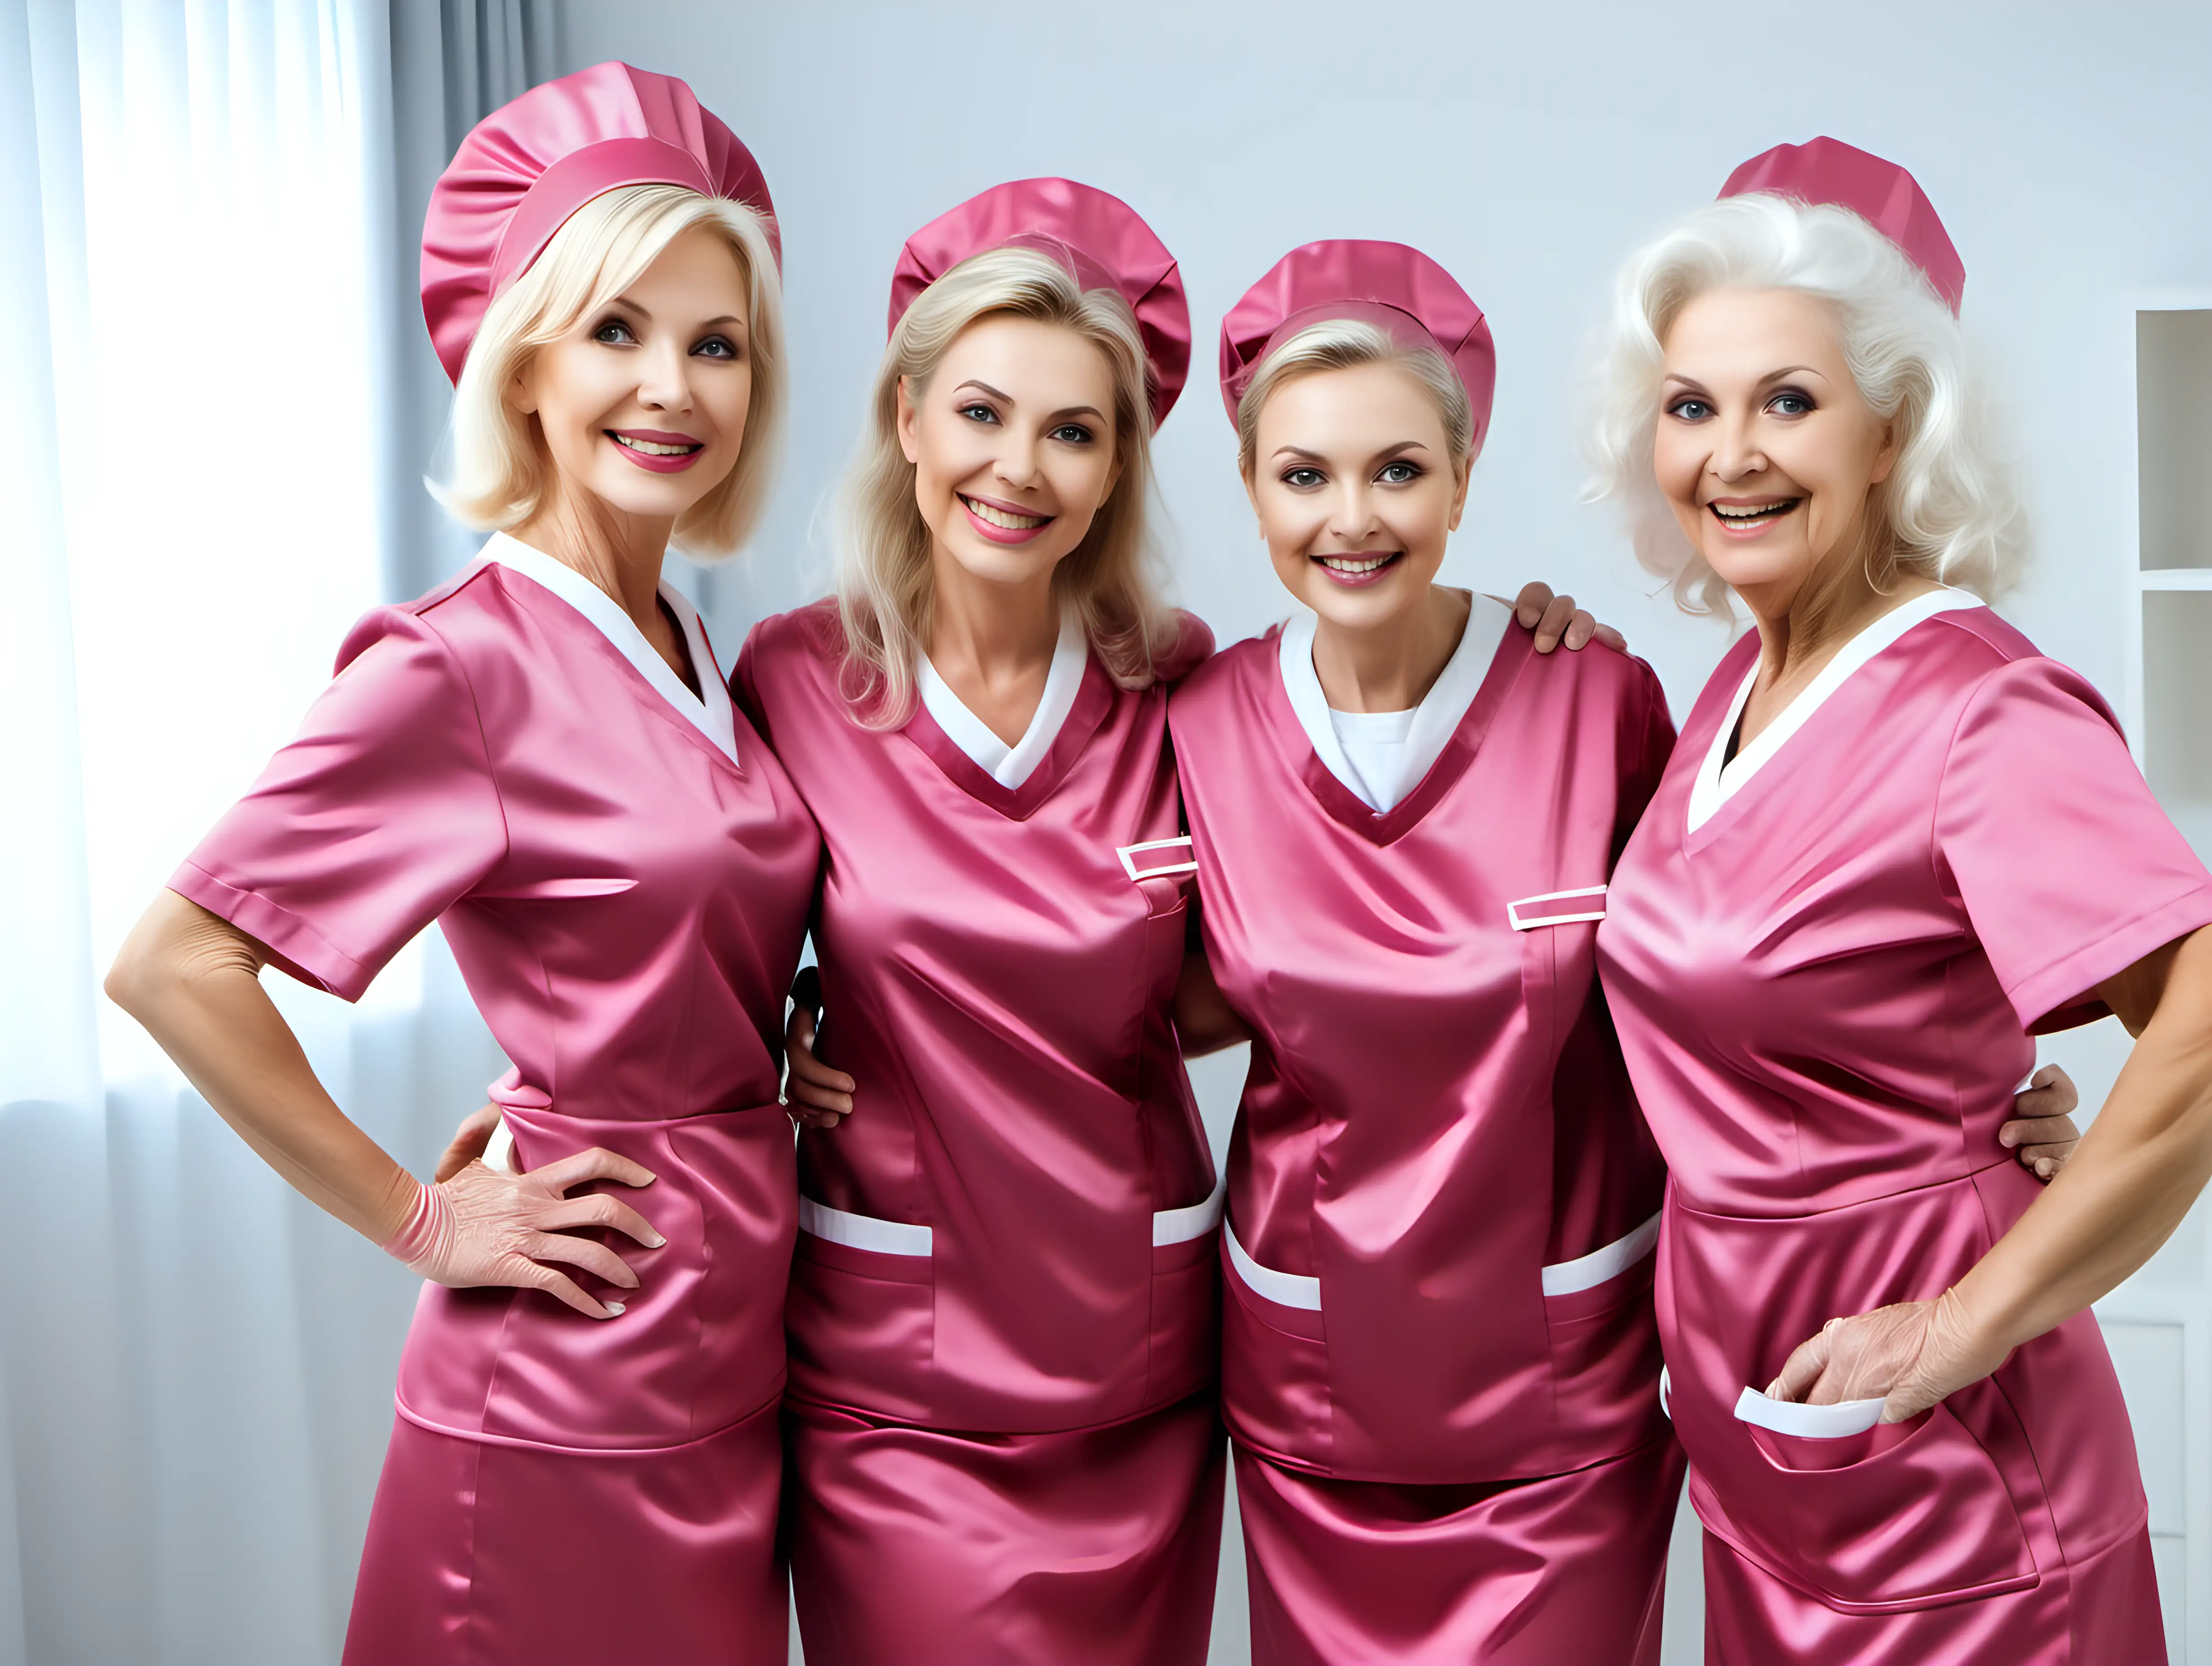 Smiling Generations Elderly Mothers and Daughters in Stylish English Nurse Uniforms